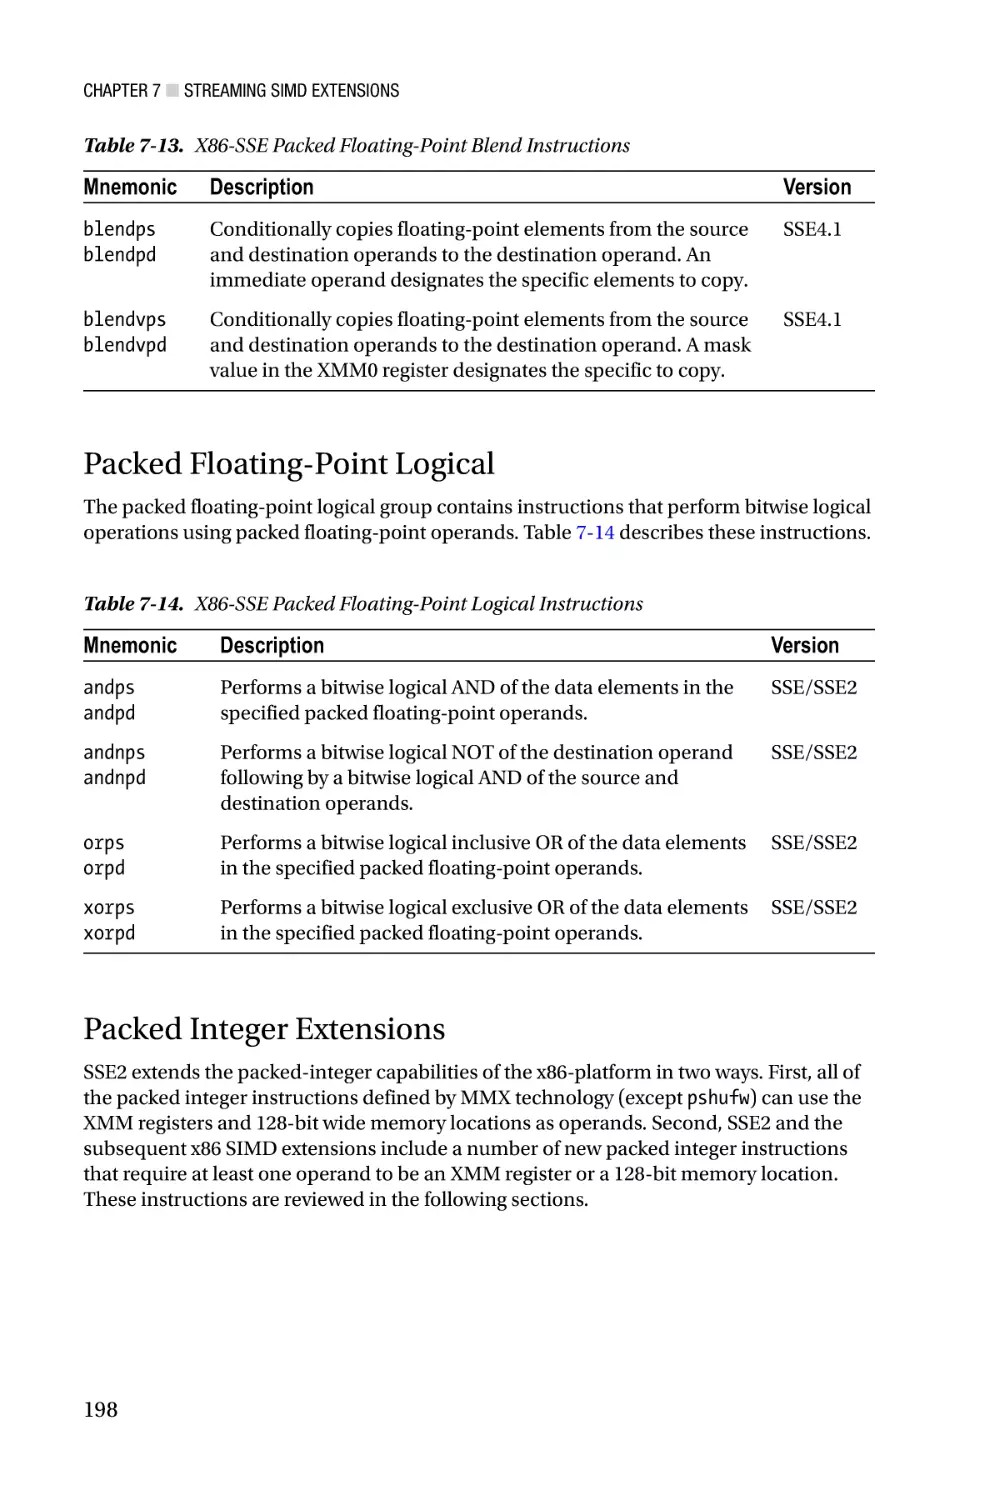 Packed Floating-Point Logical
Packed Integer Extensions